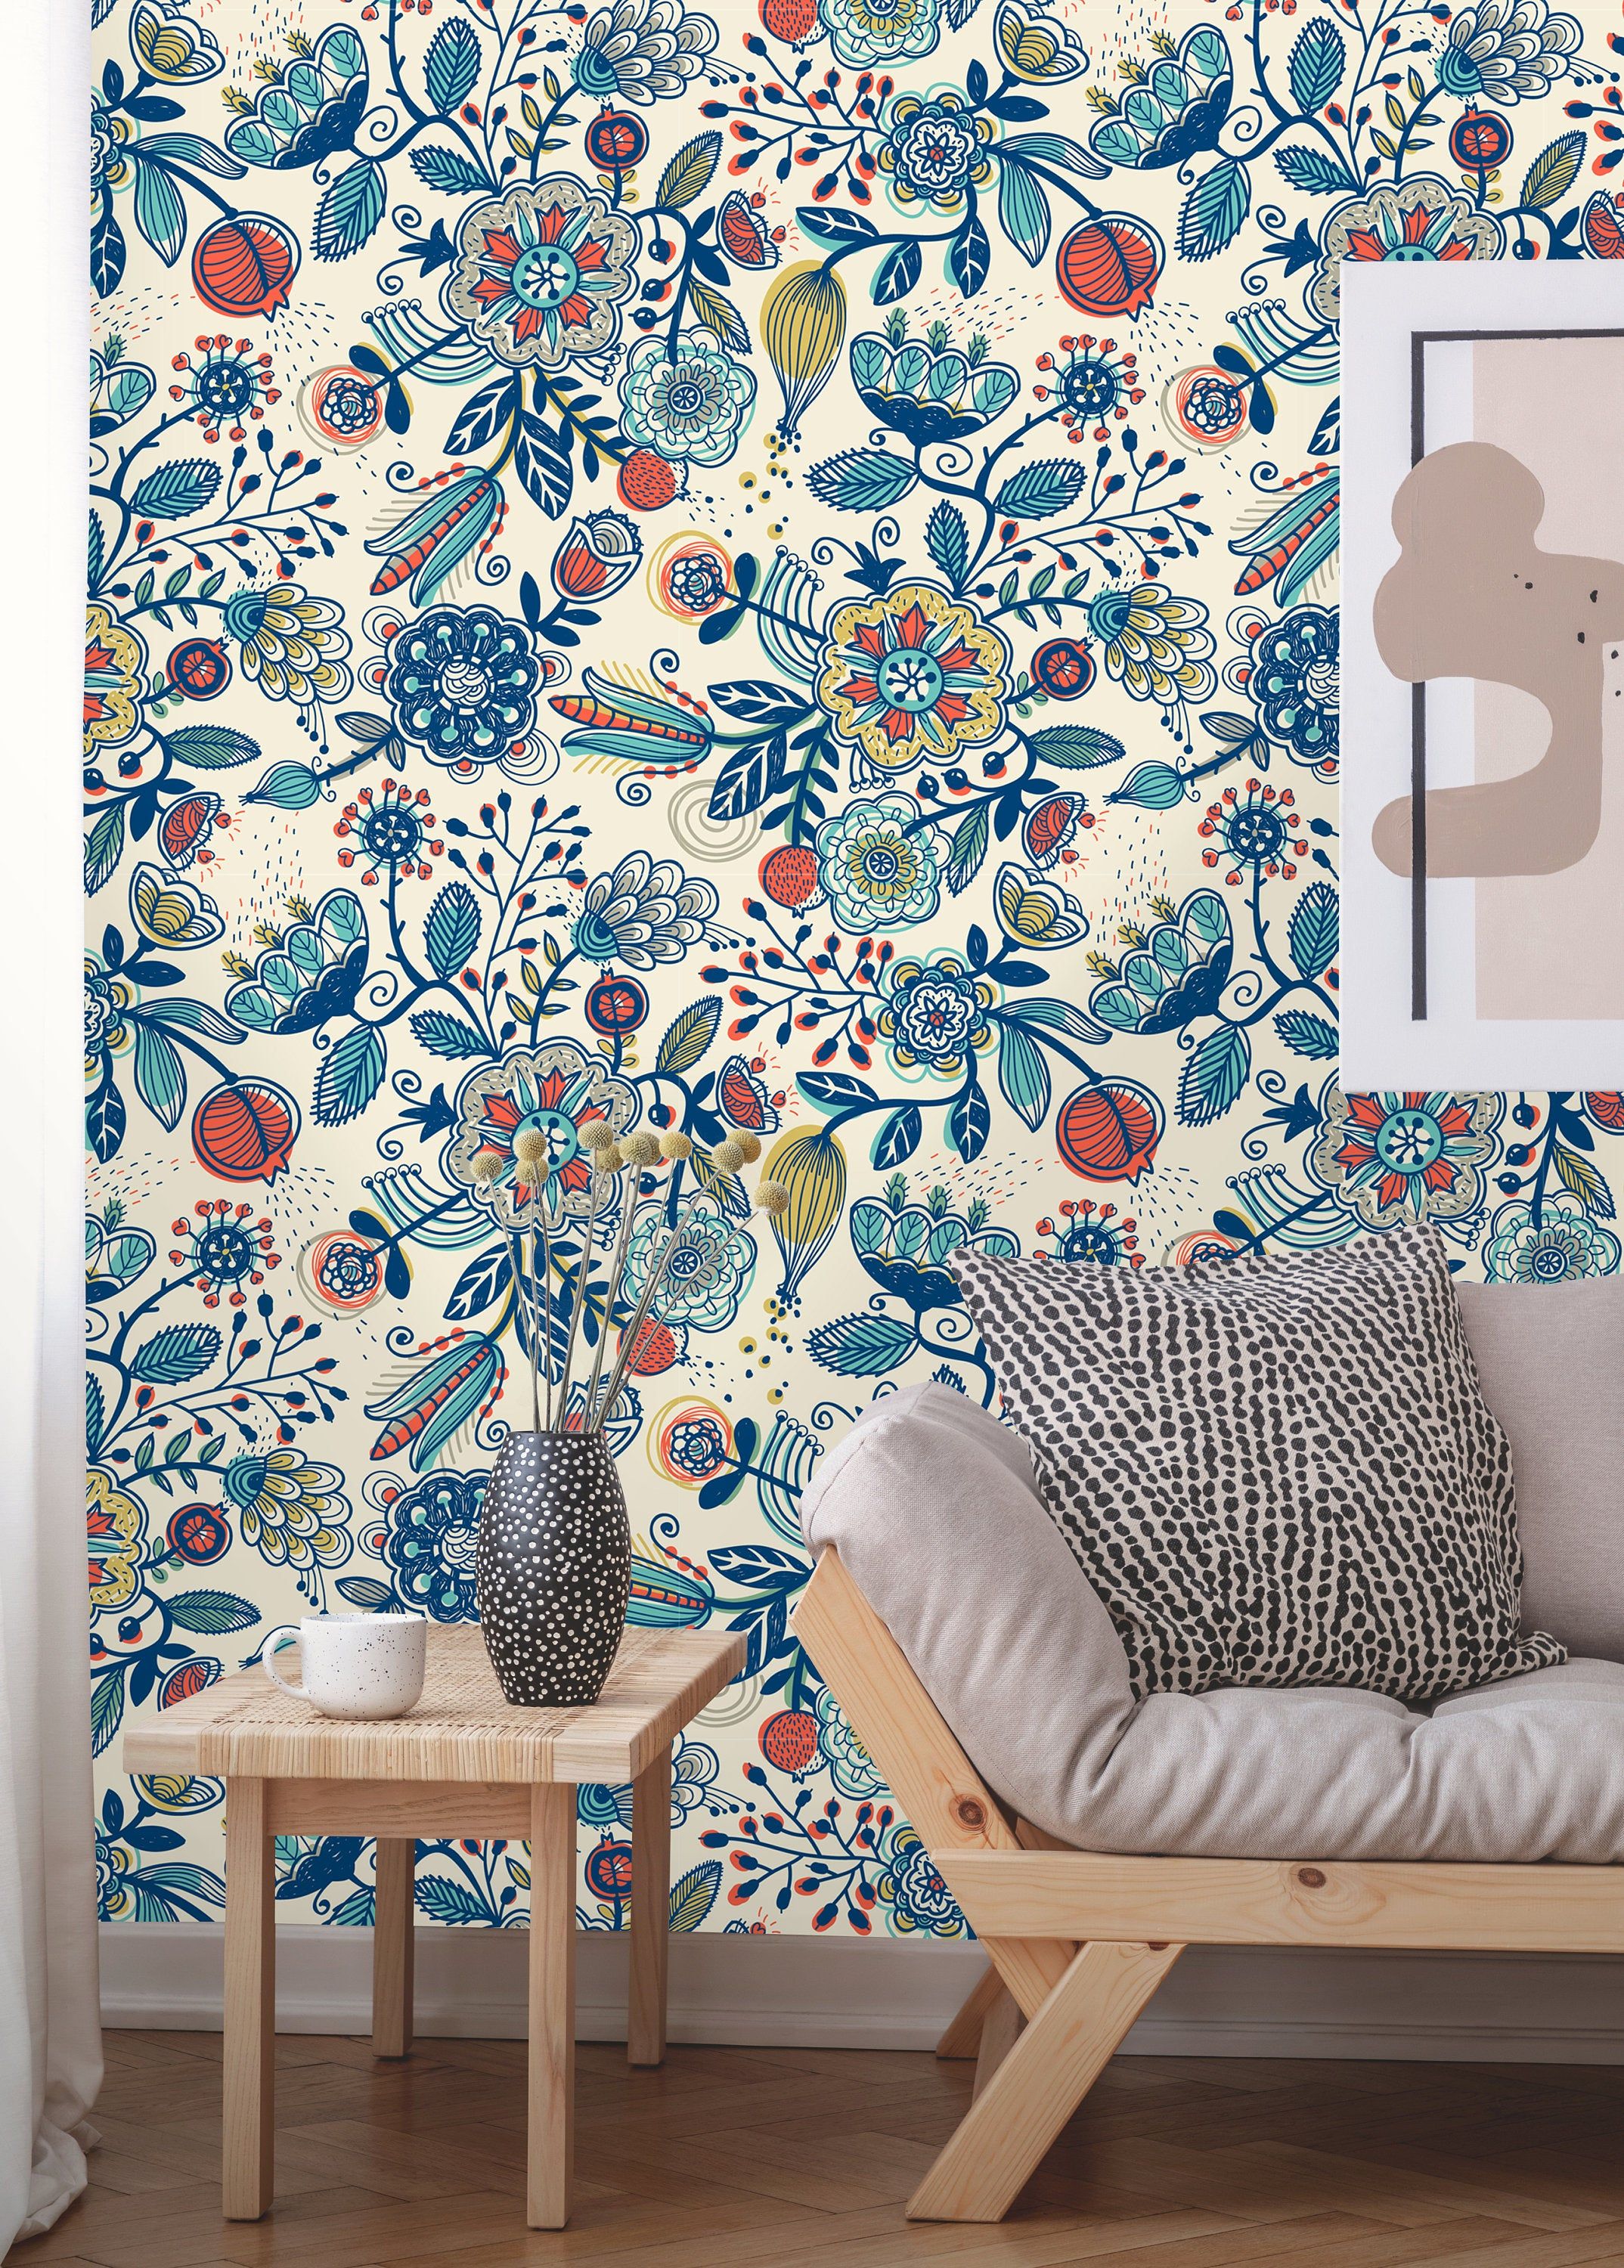 Effortless Bohemian Style: Easy DIY Makeover With Boho Peel And Stick Wallpaper